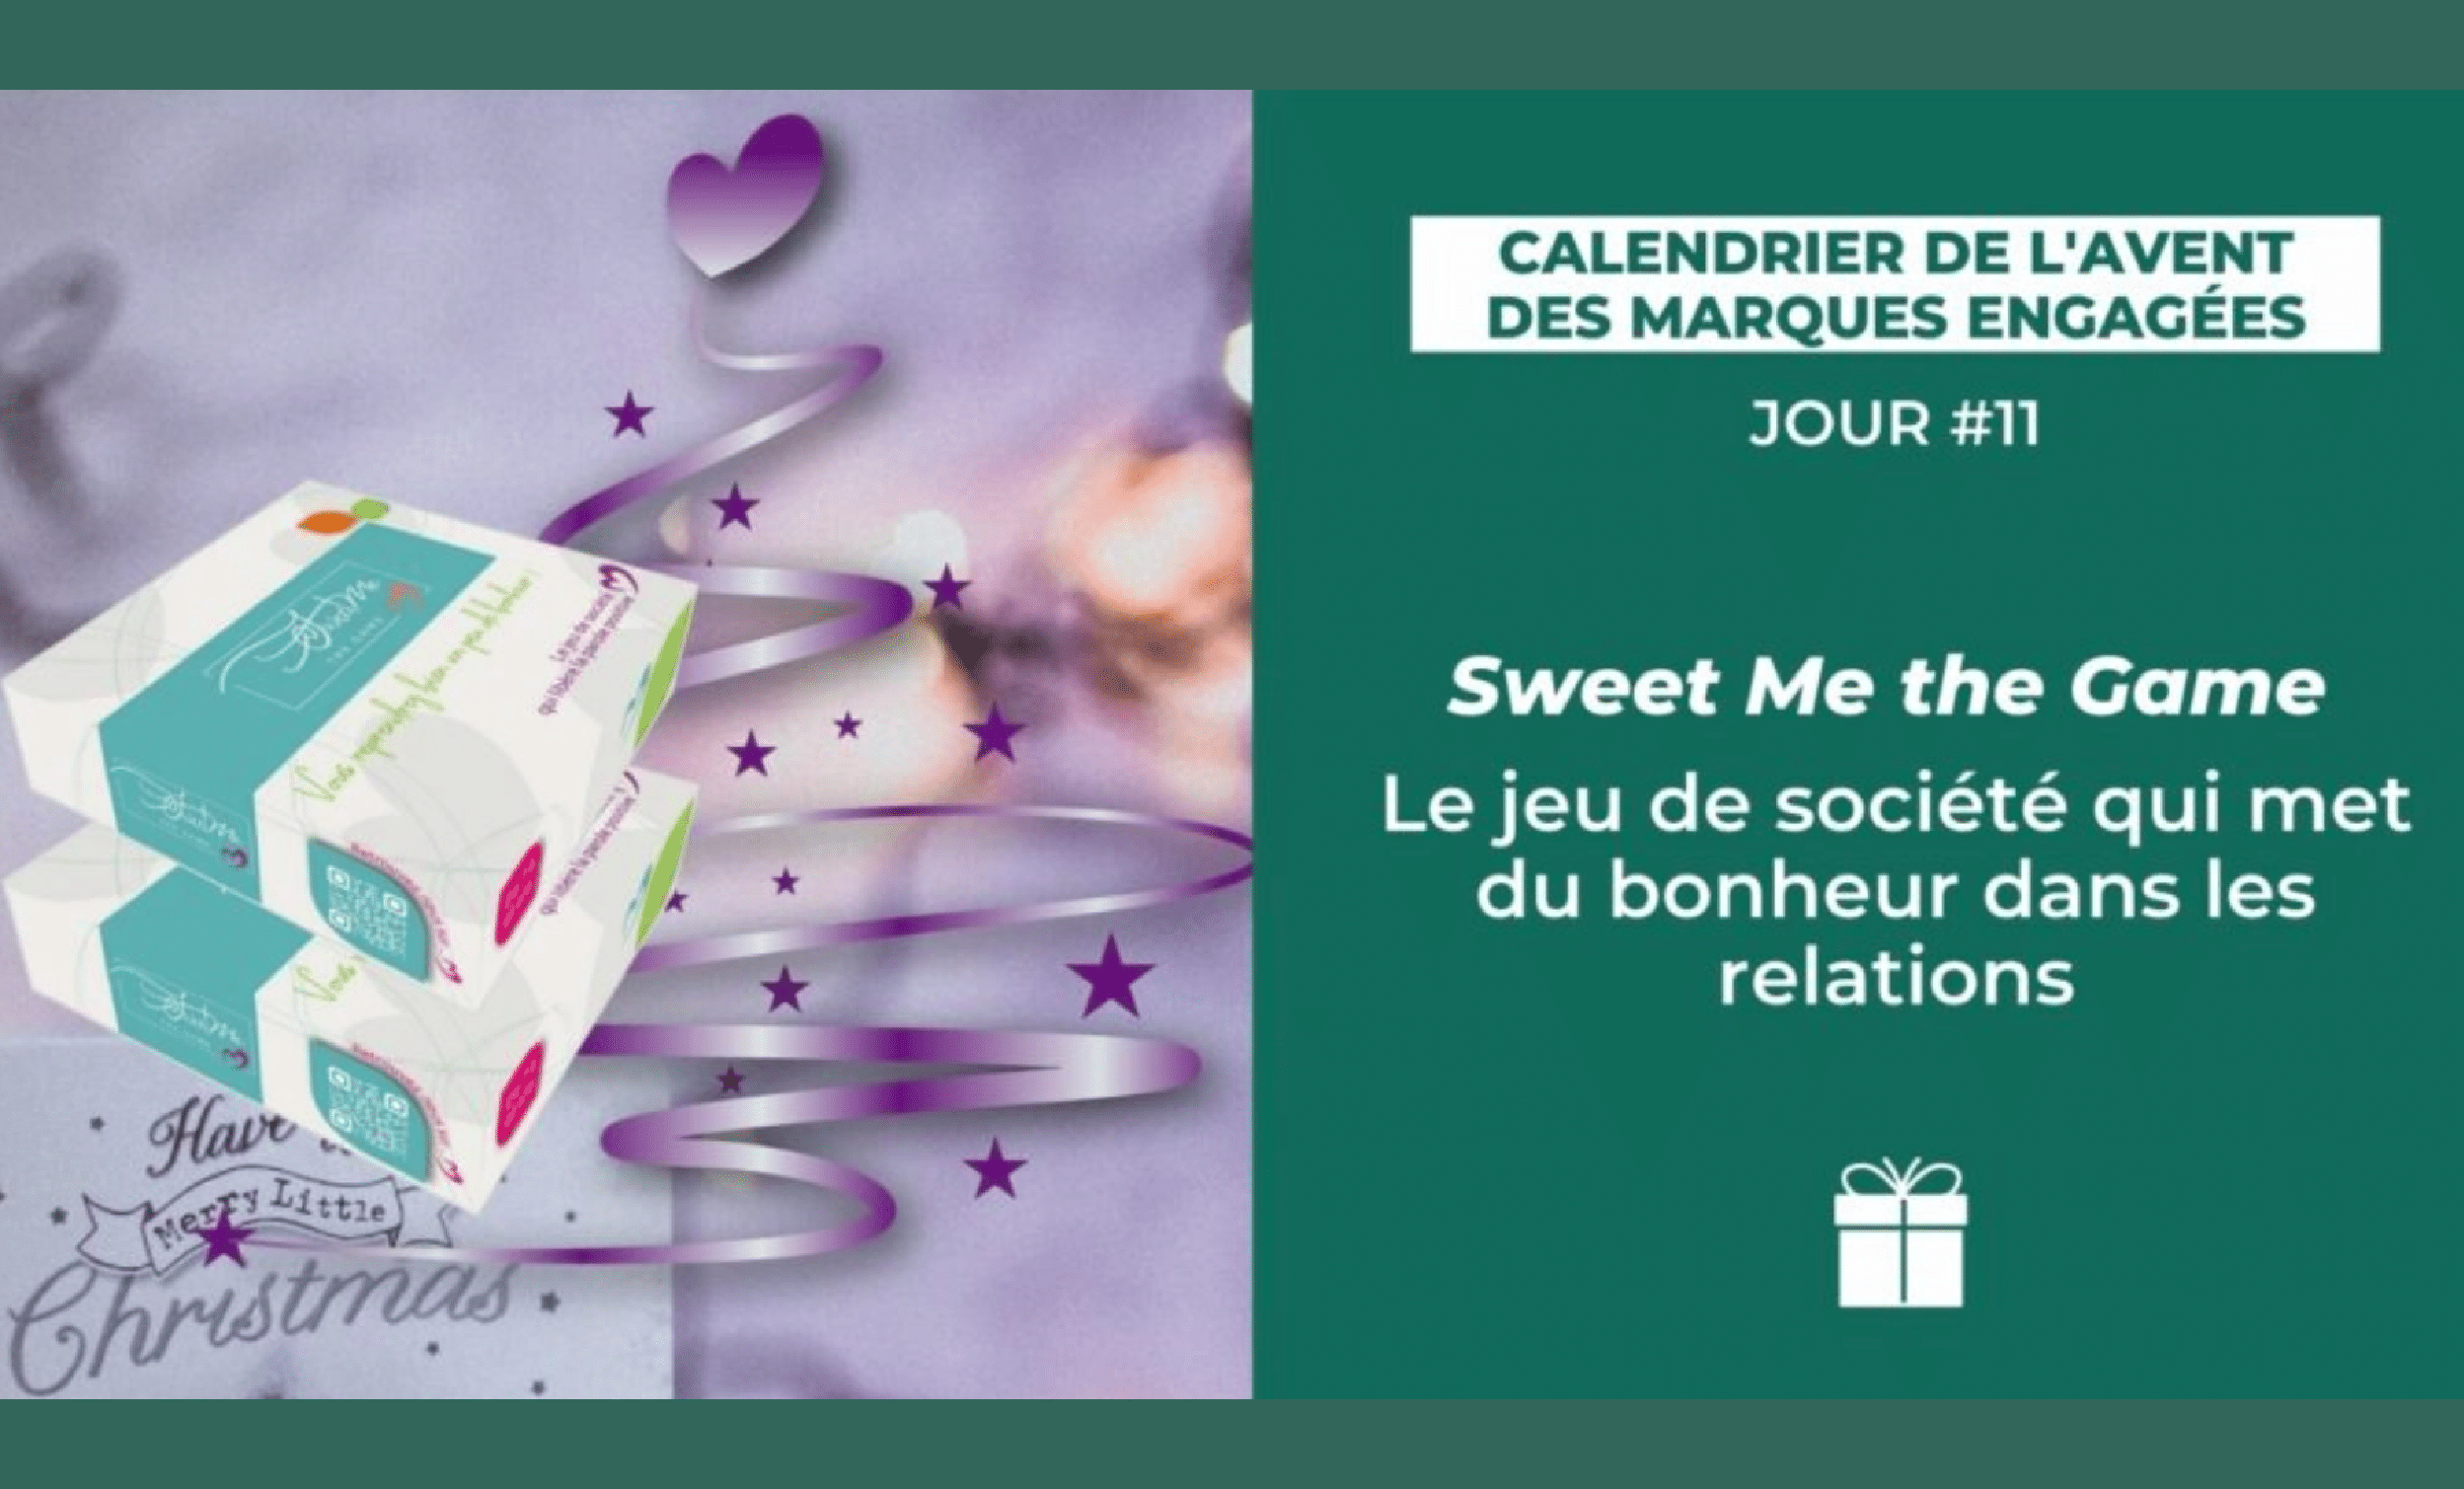 Sweet Me the Game, Tepaseul Magazine Solibattant